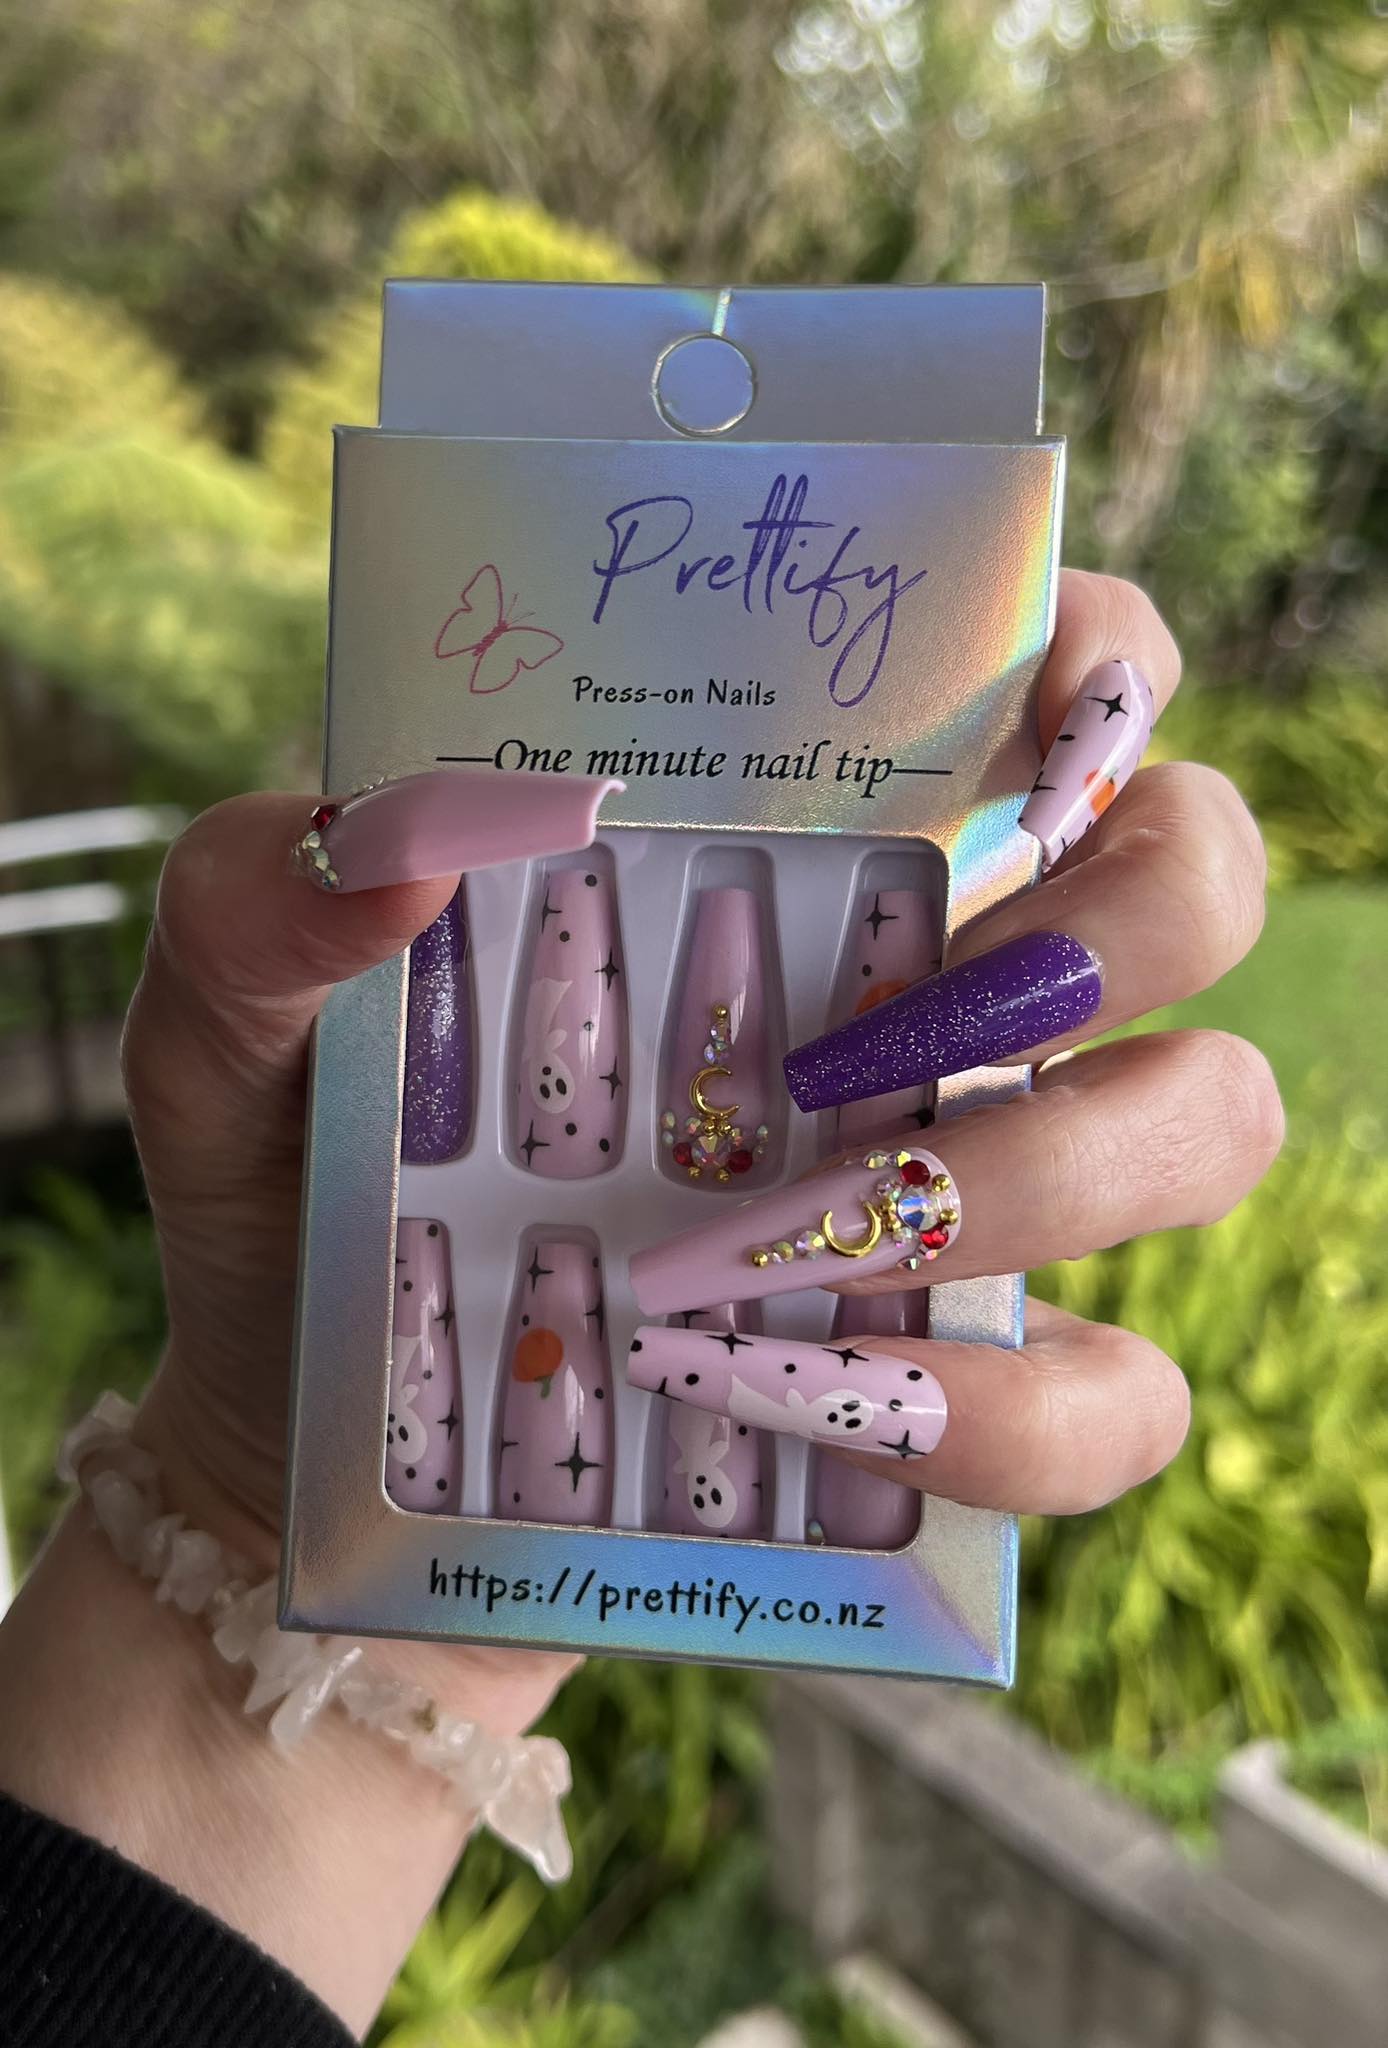 Halloween Long Coffin Press on Nails. Purple & Pink with Ghosts & Pumpkins. Easy and quick to apply. Great for those special occasions, parties or add an edge to any outfit. Gorgeous, flattering and you can re-use them again and again.